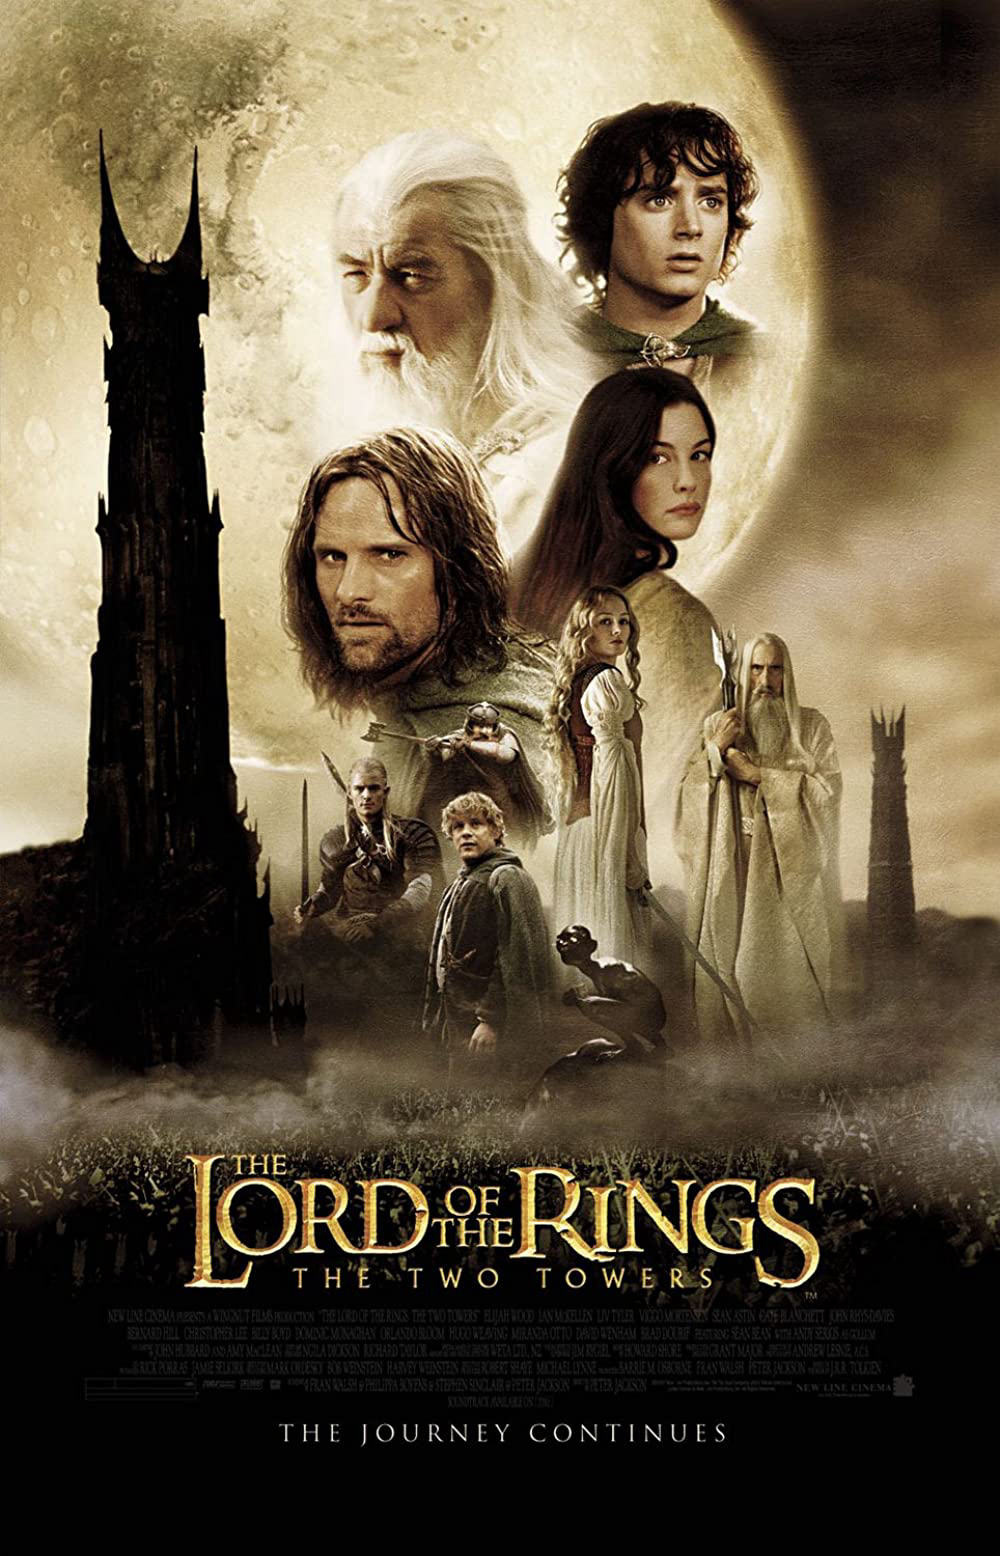 Poster Phim Chúa Tể Của Những Chiếc Nhẫn 2: Hai Tòa Tháp (The Lord of the Rings 2: The Two Towers)